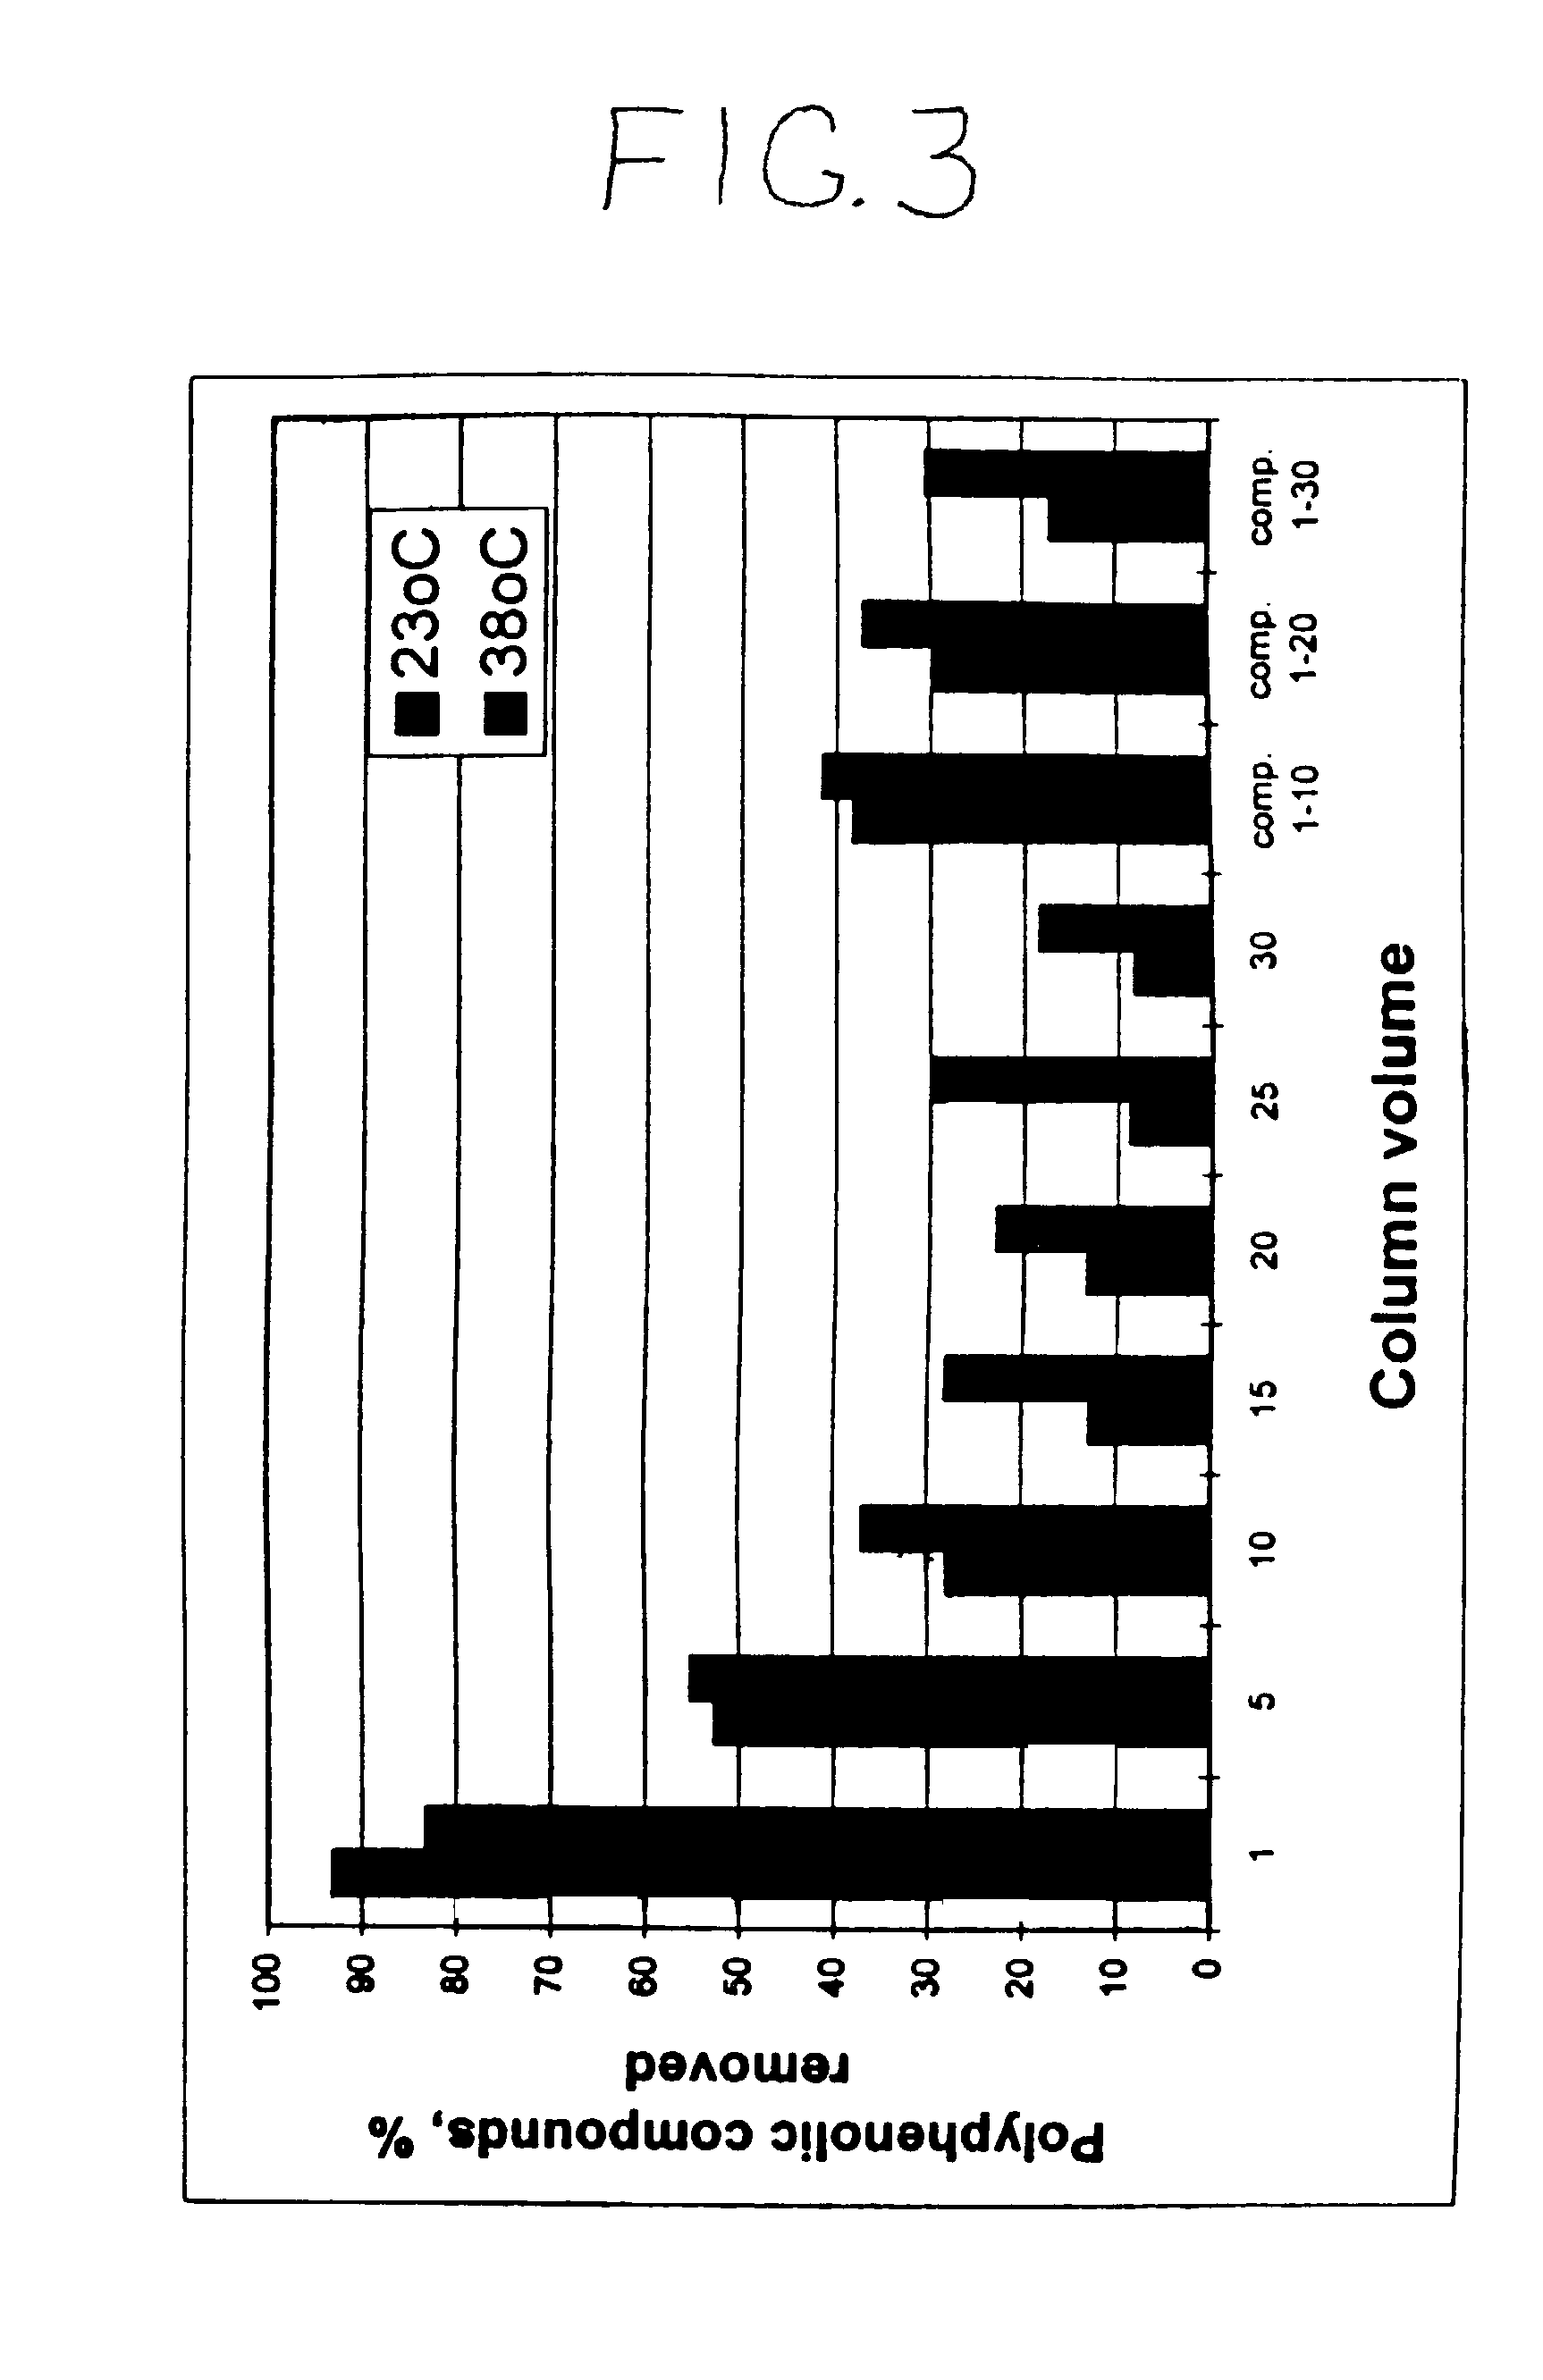 Juice processing incorporating resin treatment